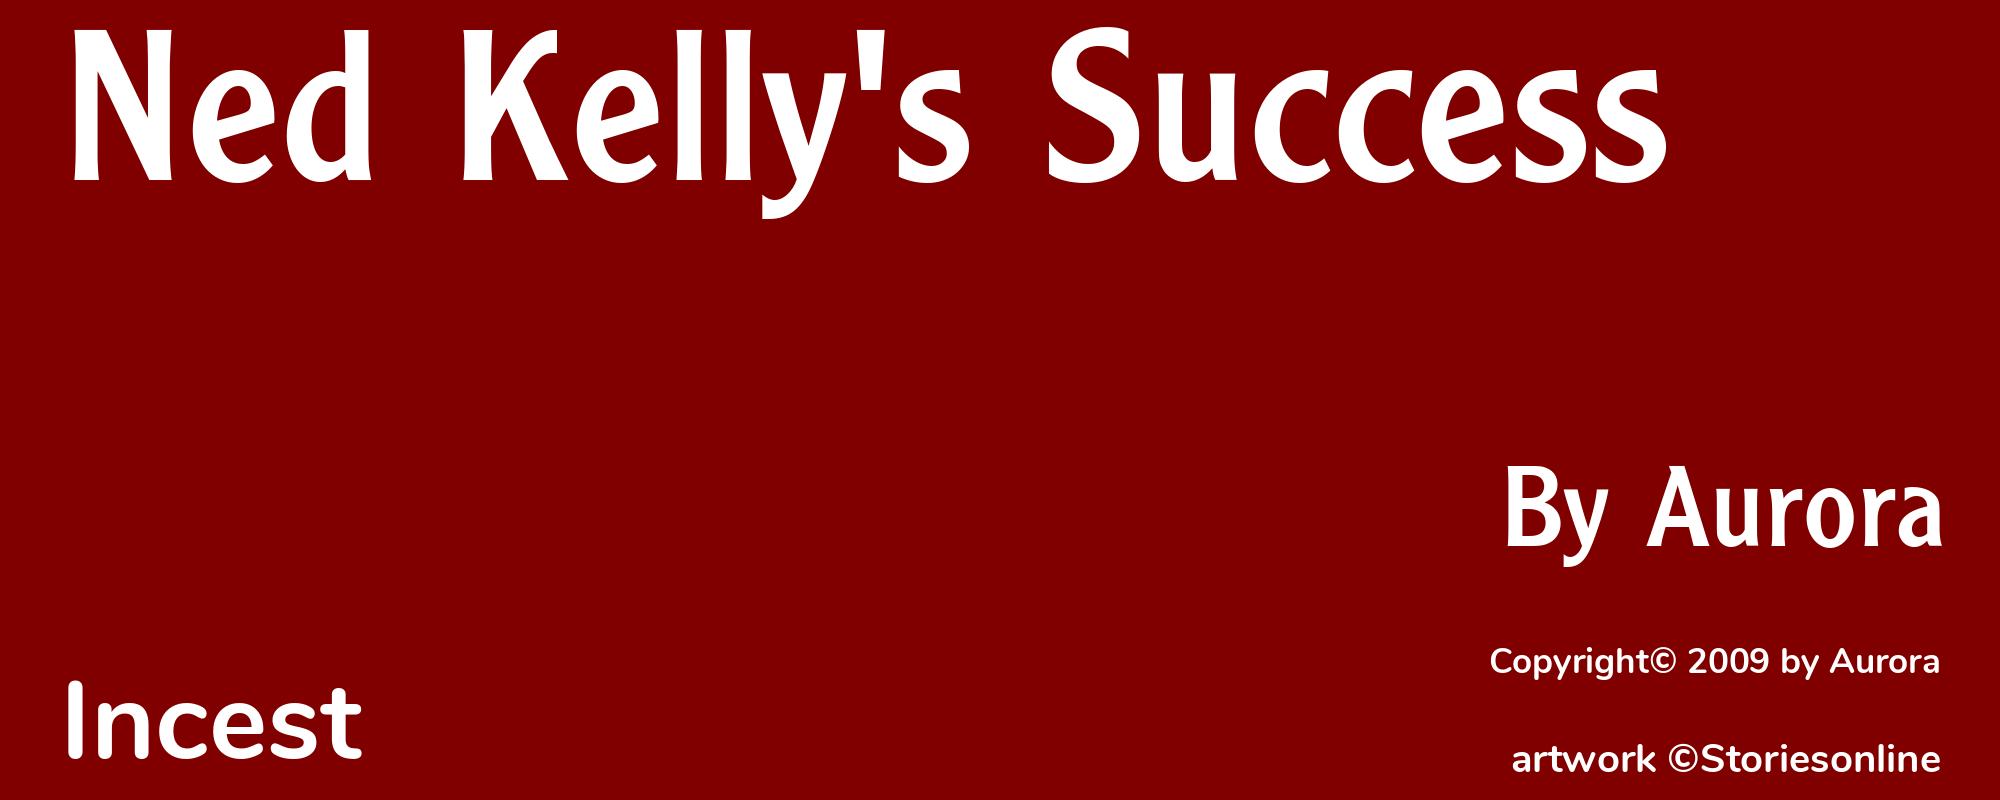 Ned Kelly's Success - Cover